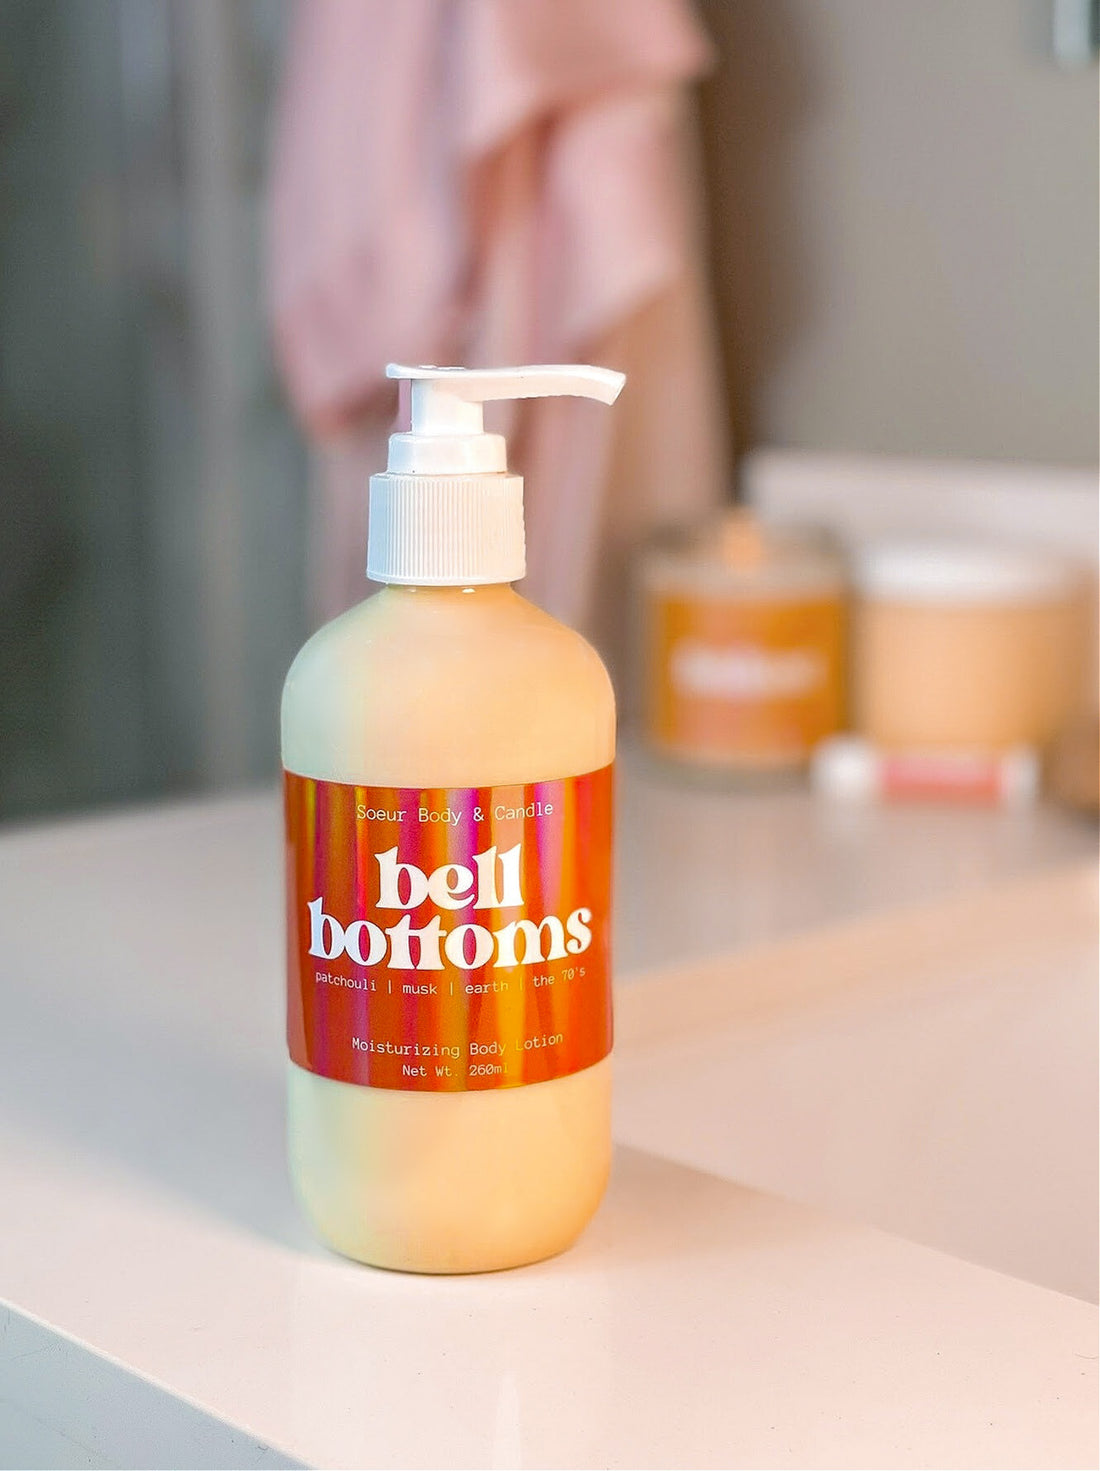 Bell Bottoms Body Lotion (patchouli, musk, earth, the 70&